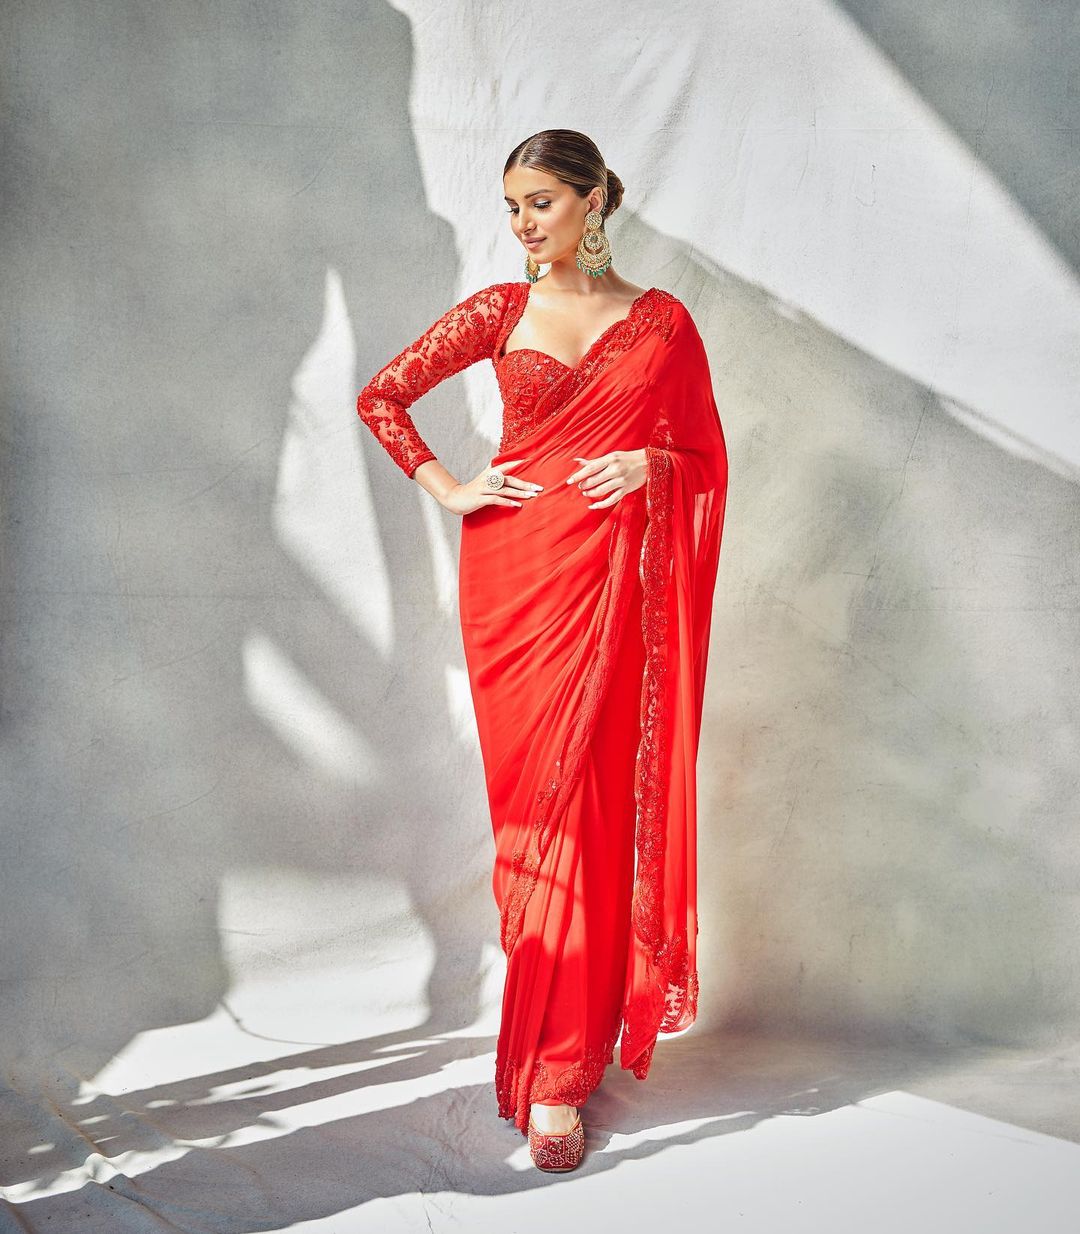 Tara Sutaria Is A Picture Of Elegance In Red Saree With ...